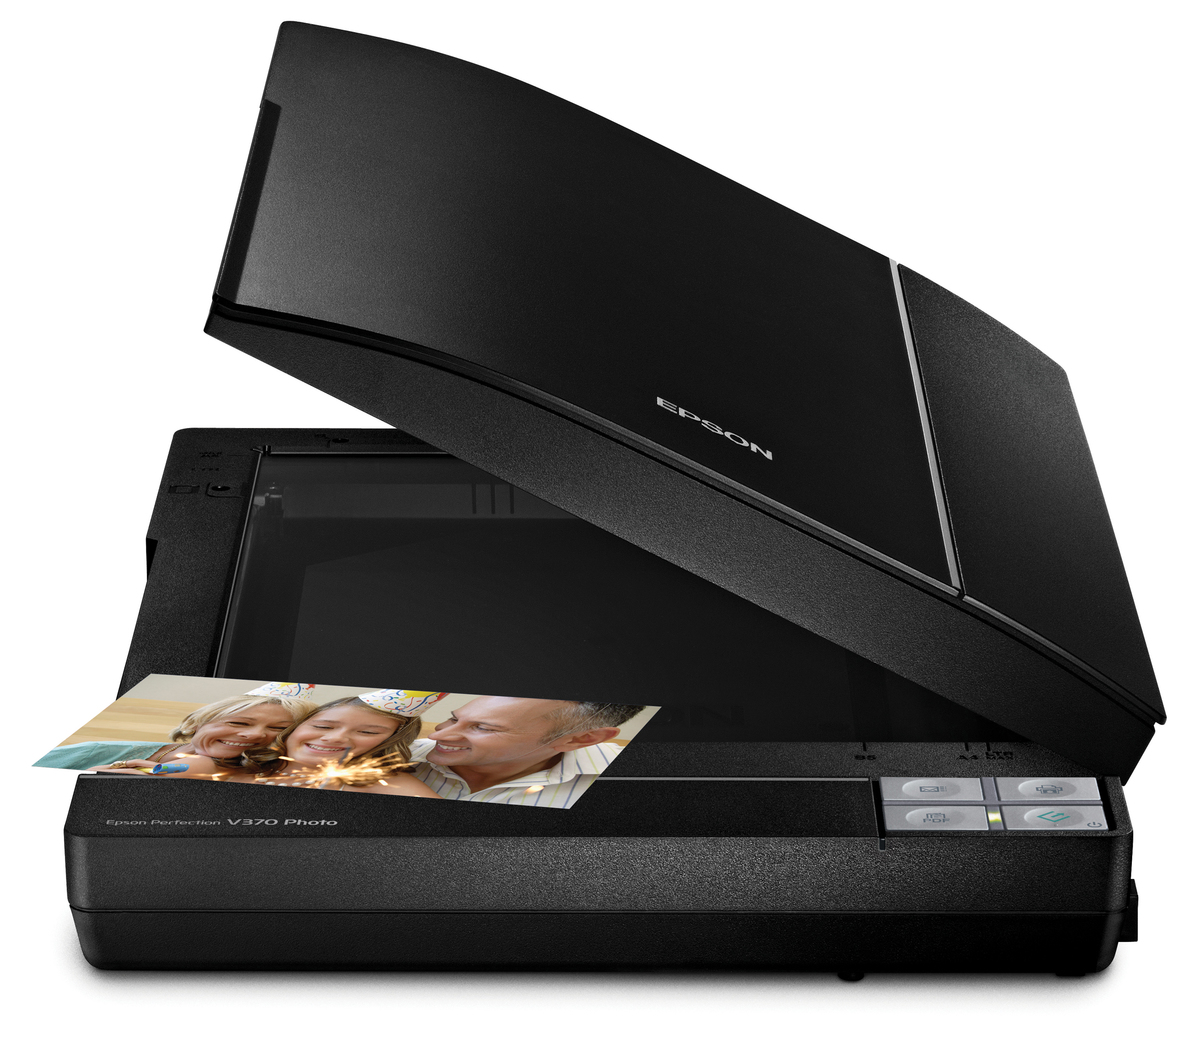  Epson  Perfection V370  Flatbed Photo Scanner  A4 Home 